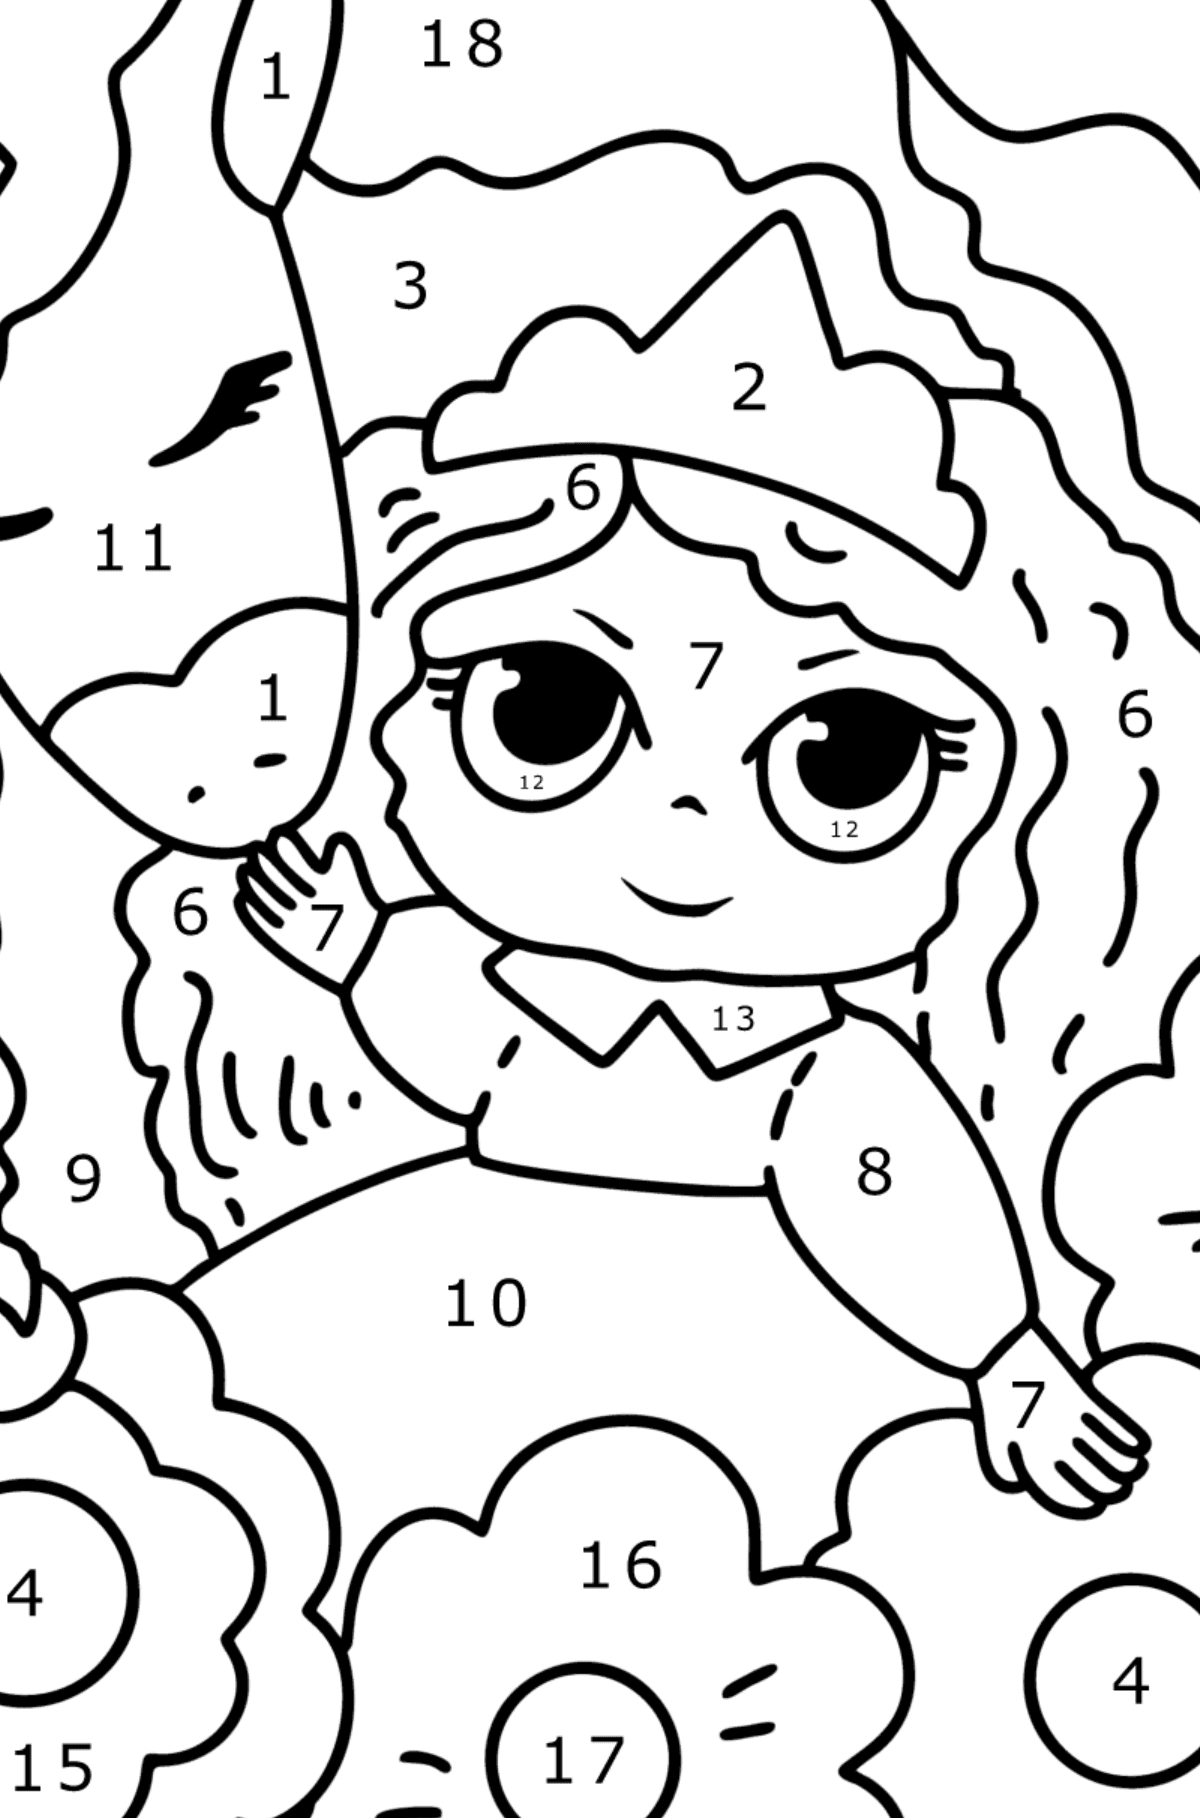 Magical unicorn and princess coloring page - Coloring by Numbers for Kids